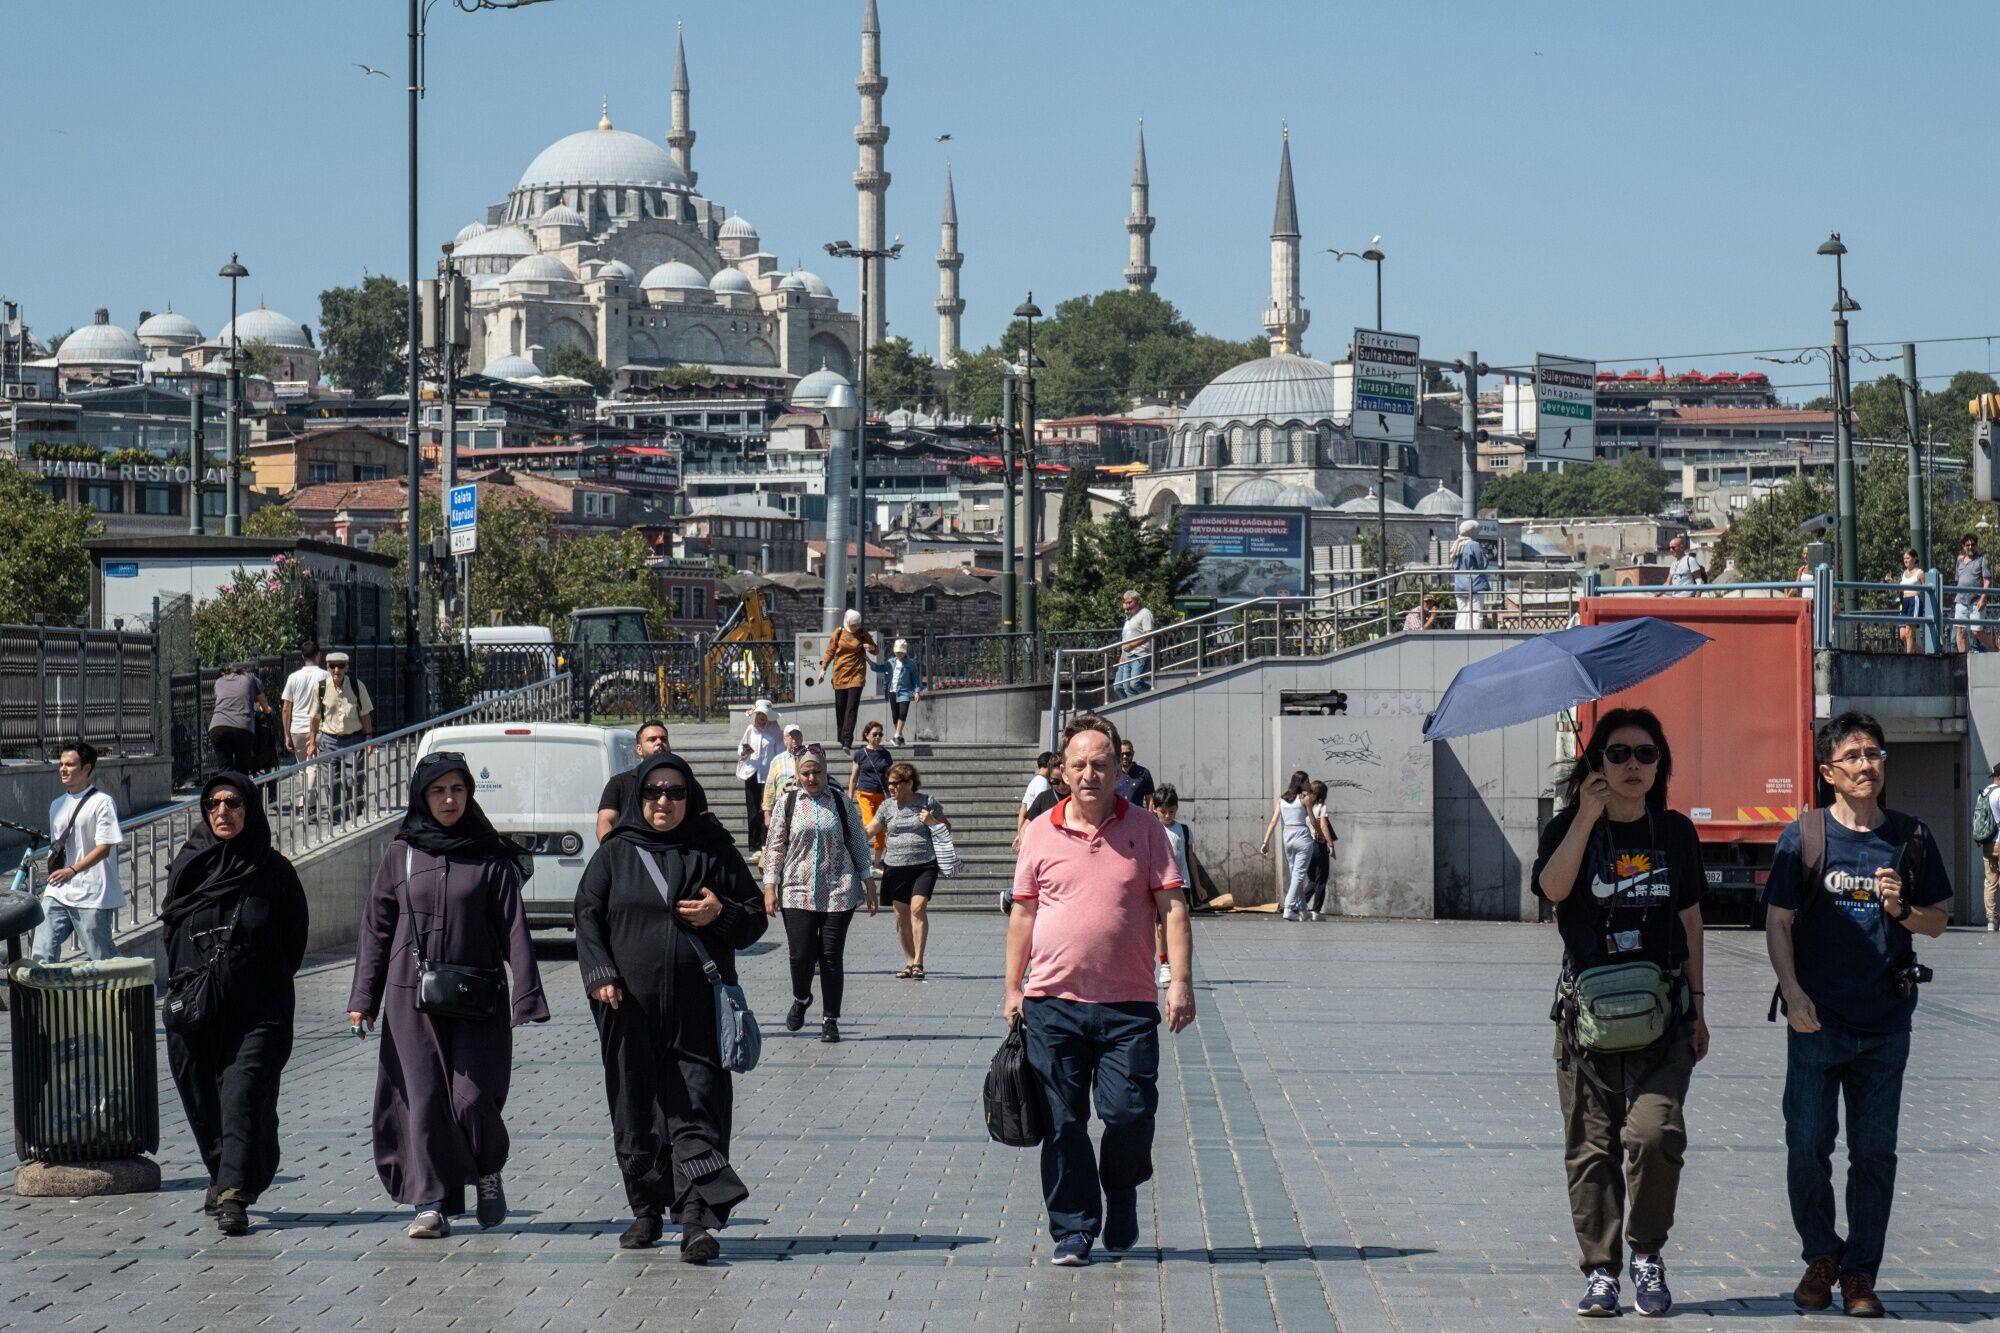 About 565,000 Chinese travellers visited Turkey in 2019 before the Covid-19 pandemic, accoridng to Consul General Kerim Sercan Evcin. Photo: Bloomberg